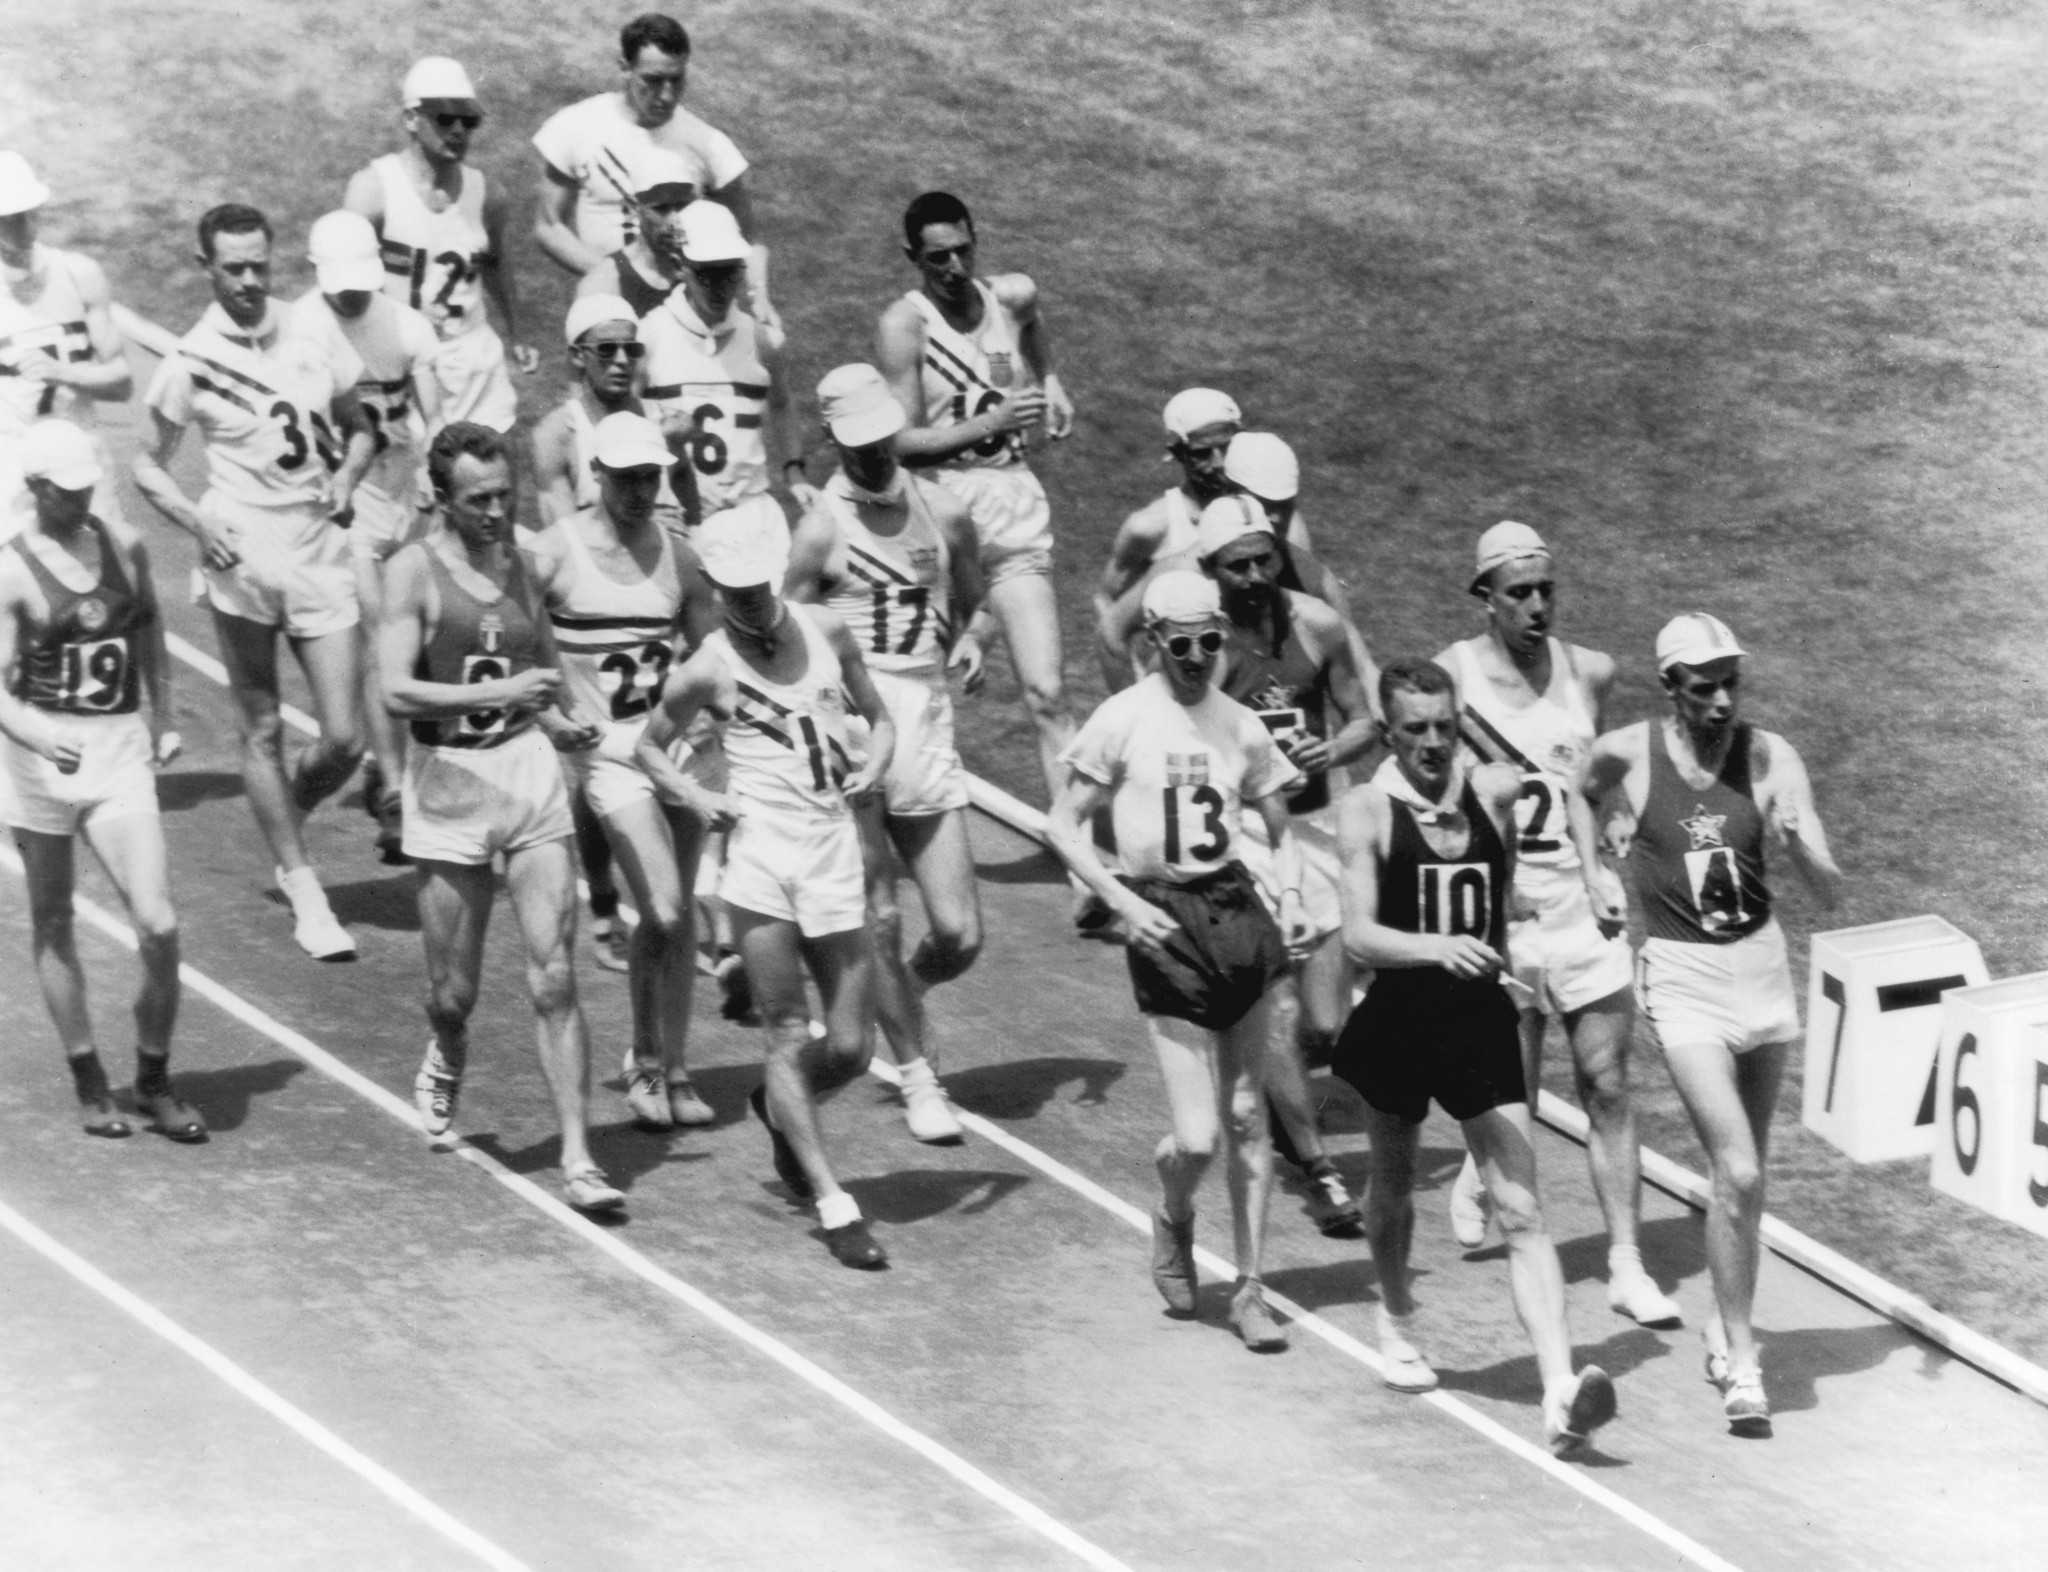 A 50km race walk for men has featured in every Olympic Games since Los Angeles 1932, except at Montreal 1976 ©Getty Images